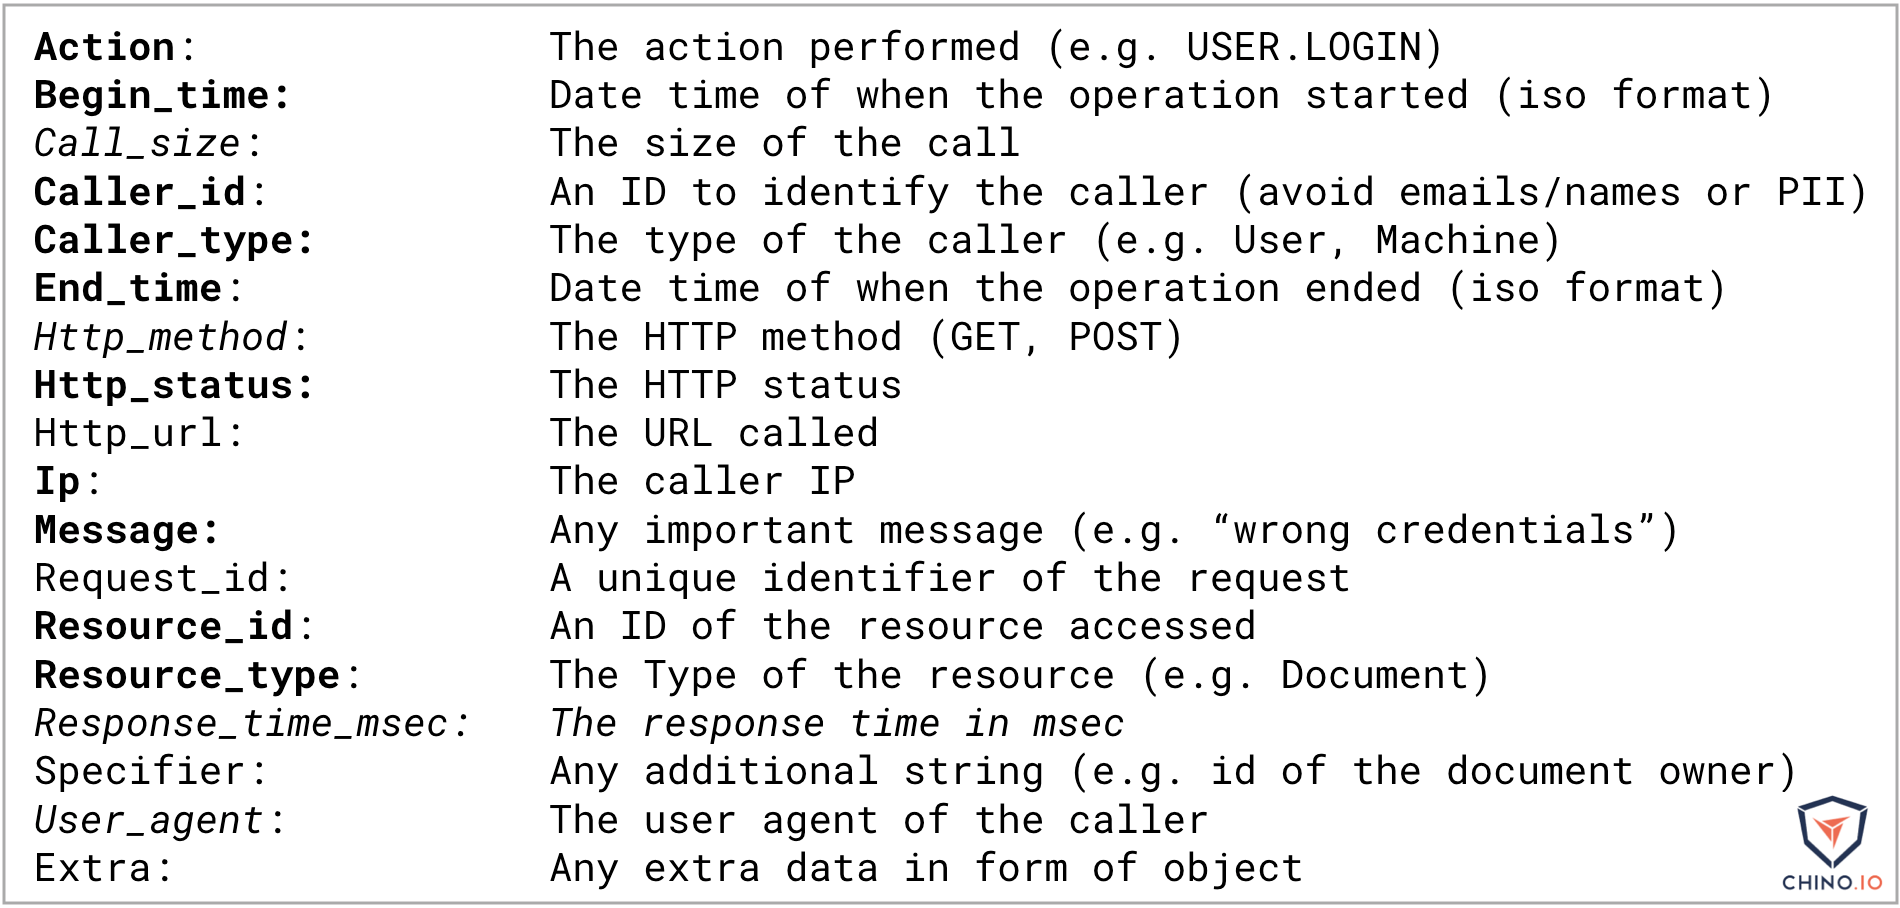 Chino.io offers an API for creating compliant audit logs